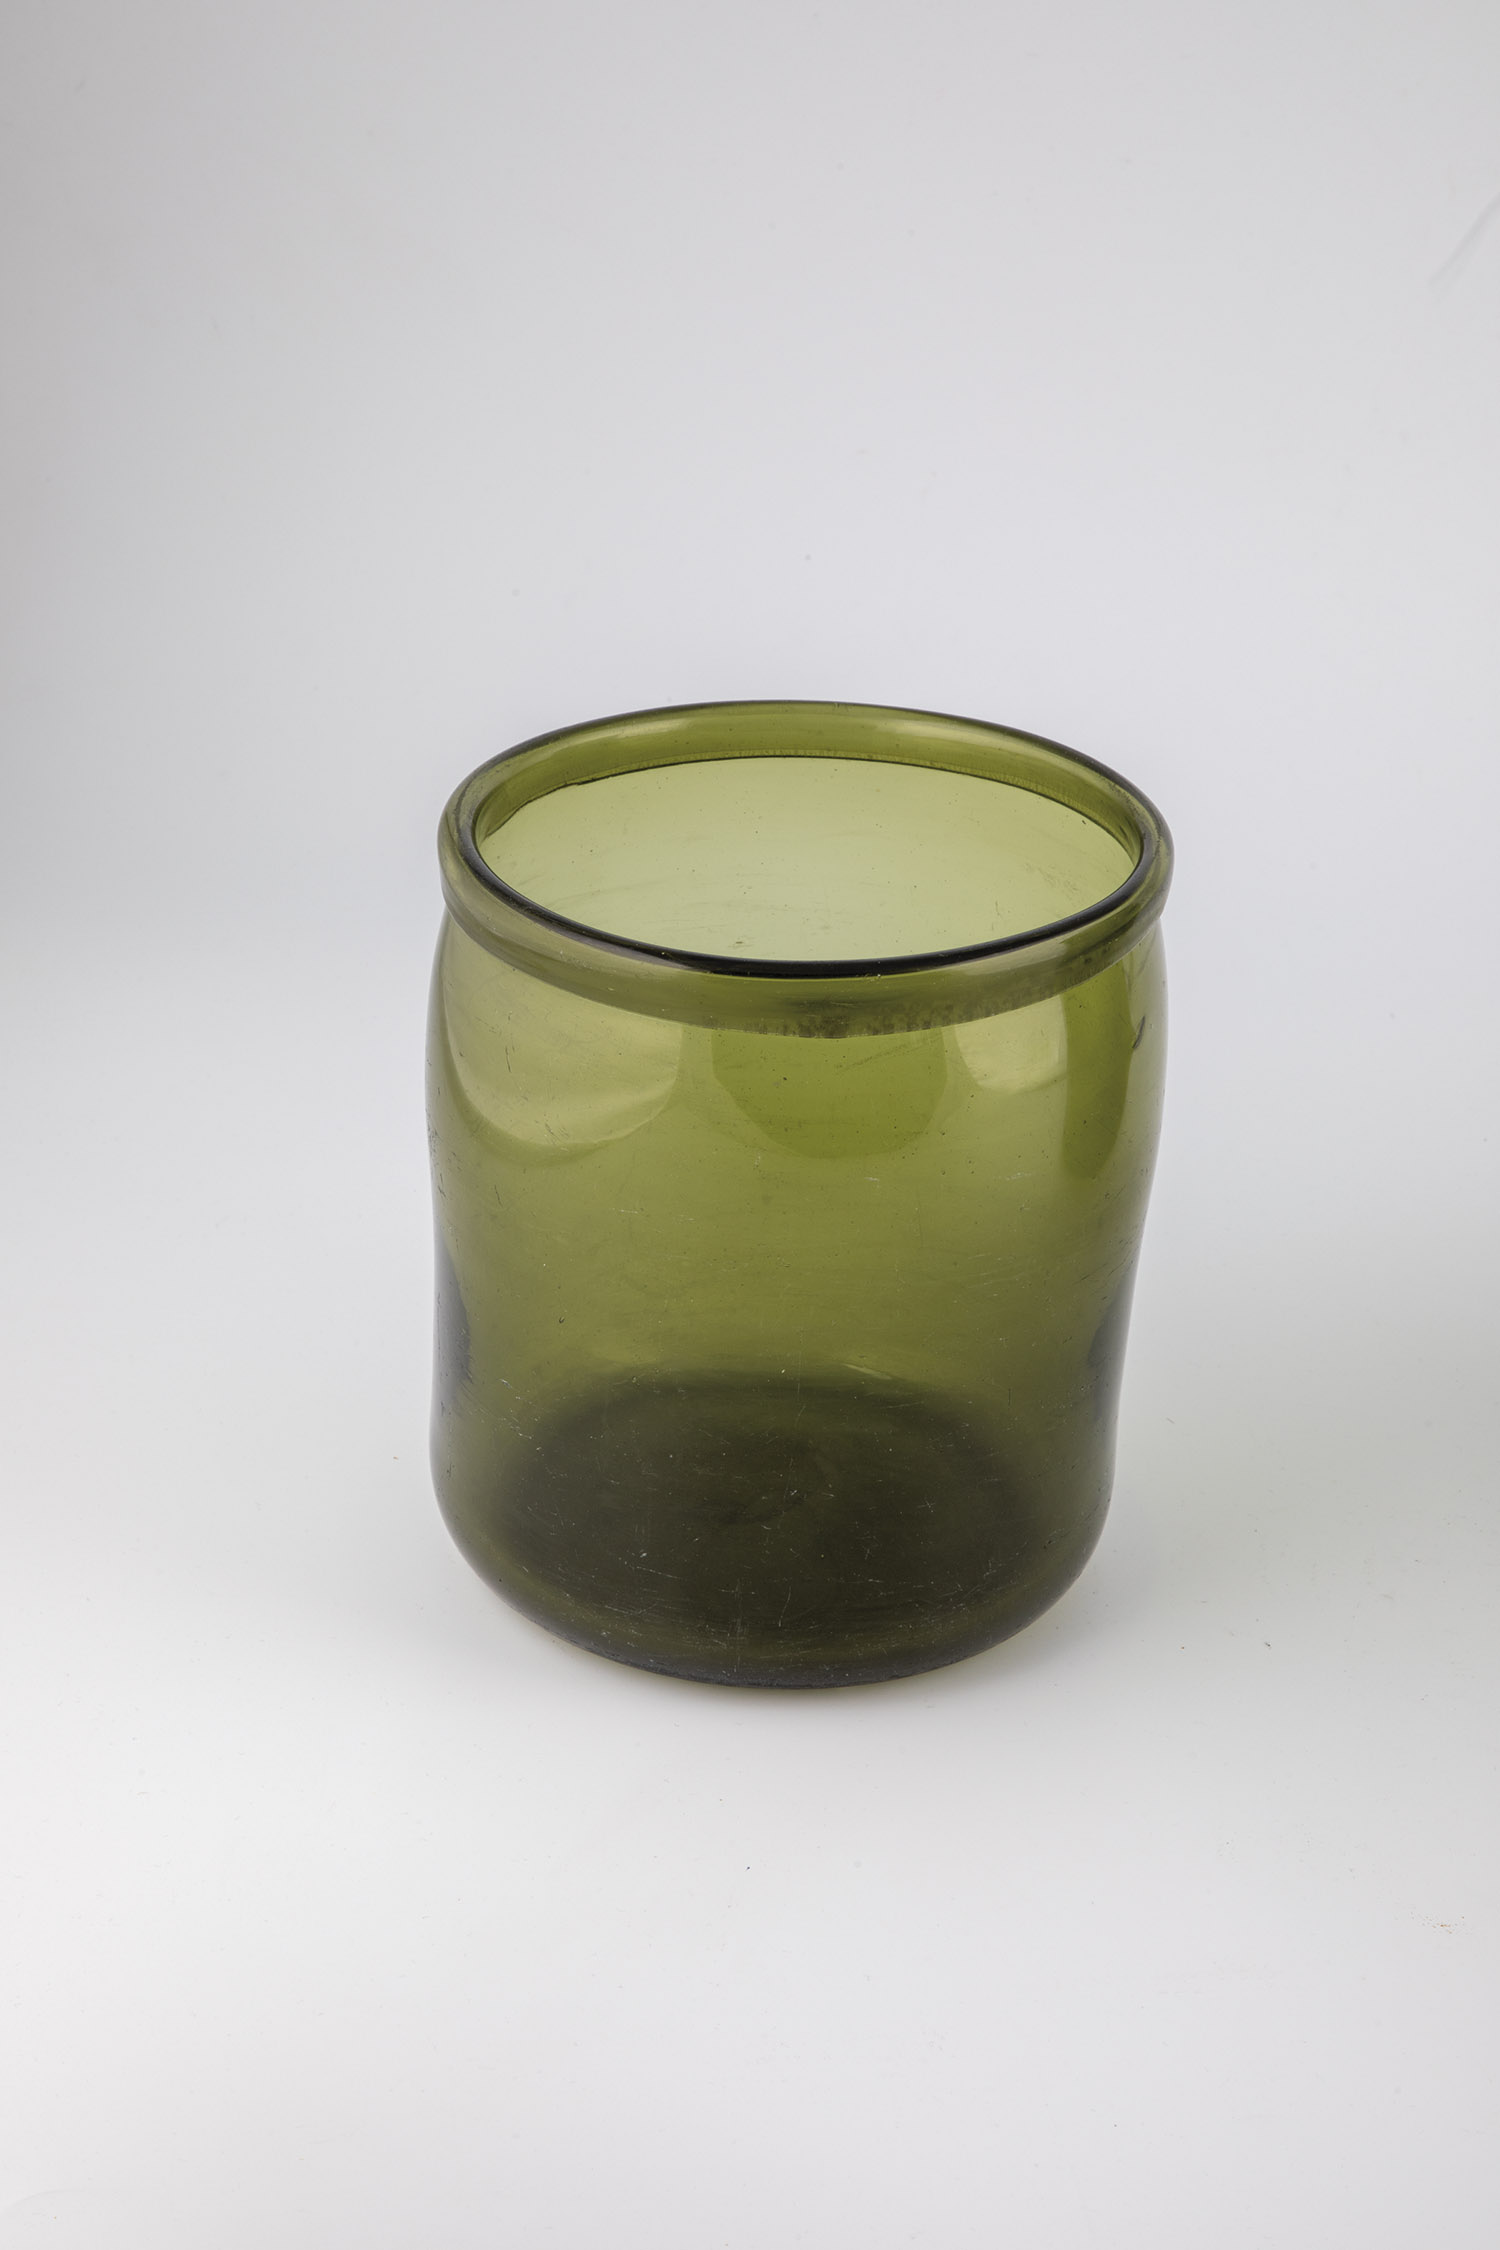 Large storage vessel (harbour) Weserbergland, around 1800 Green glass with demolition. Cylindrical